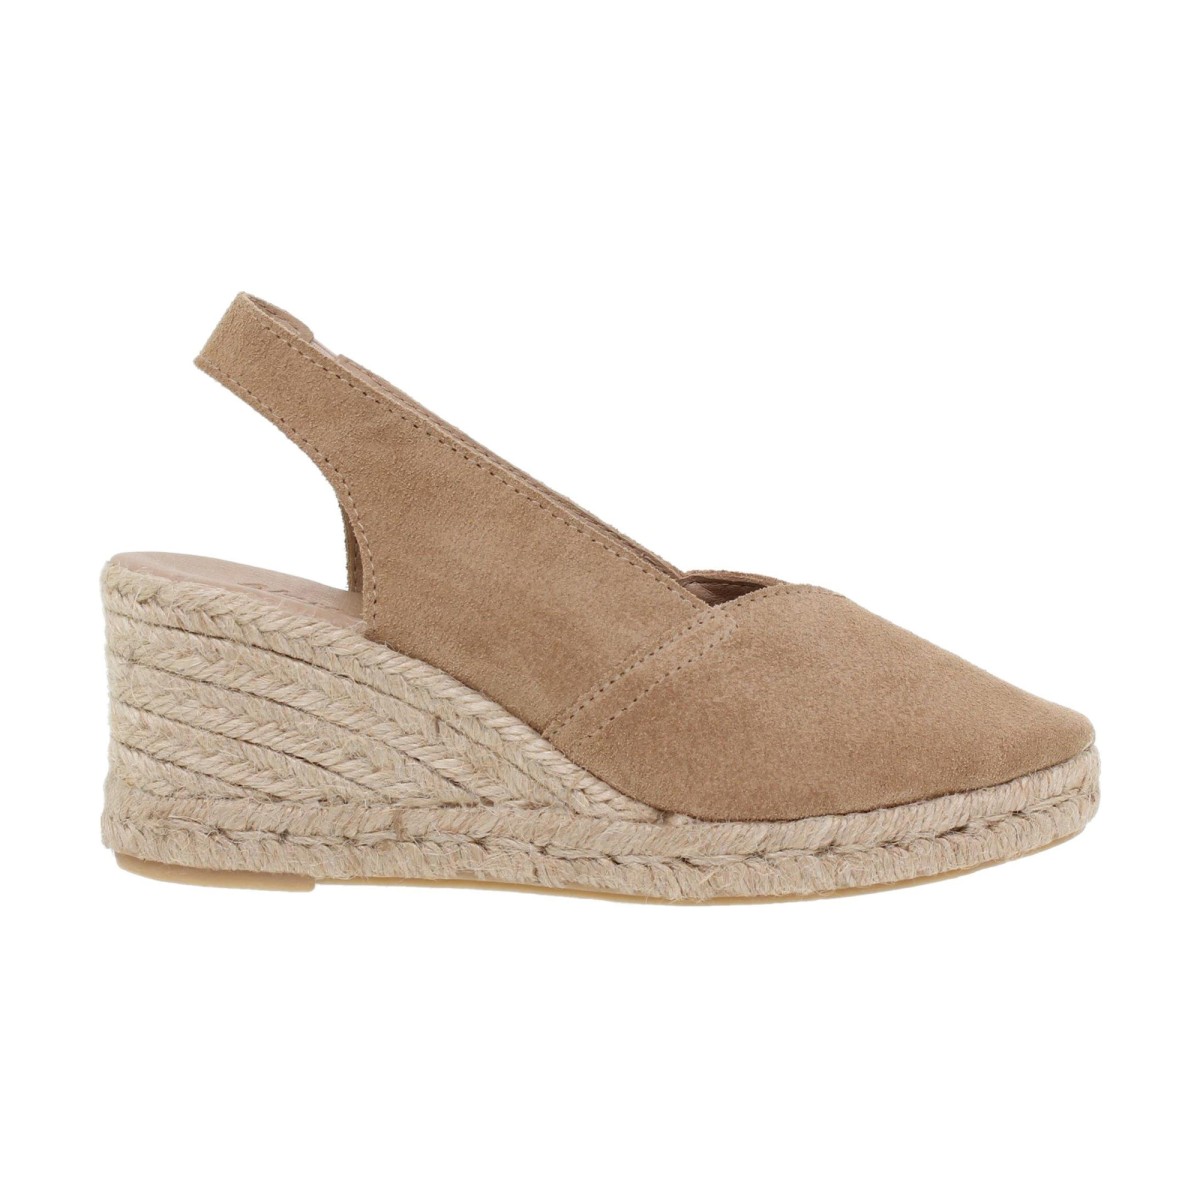 Sand leather espadrilles with wedge by Amelie